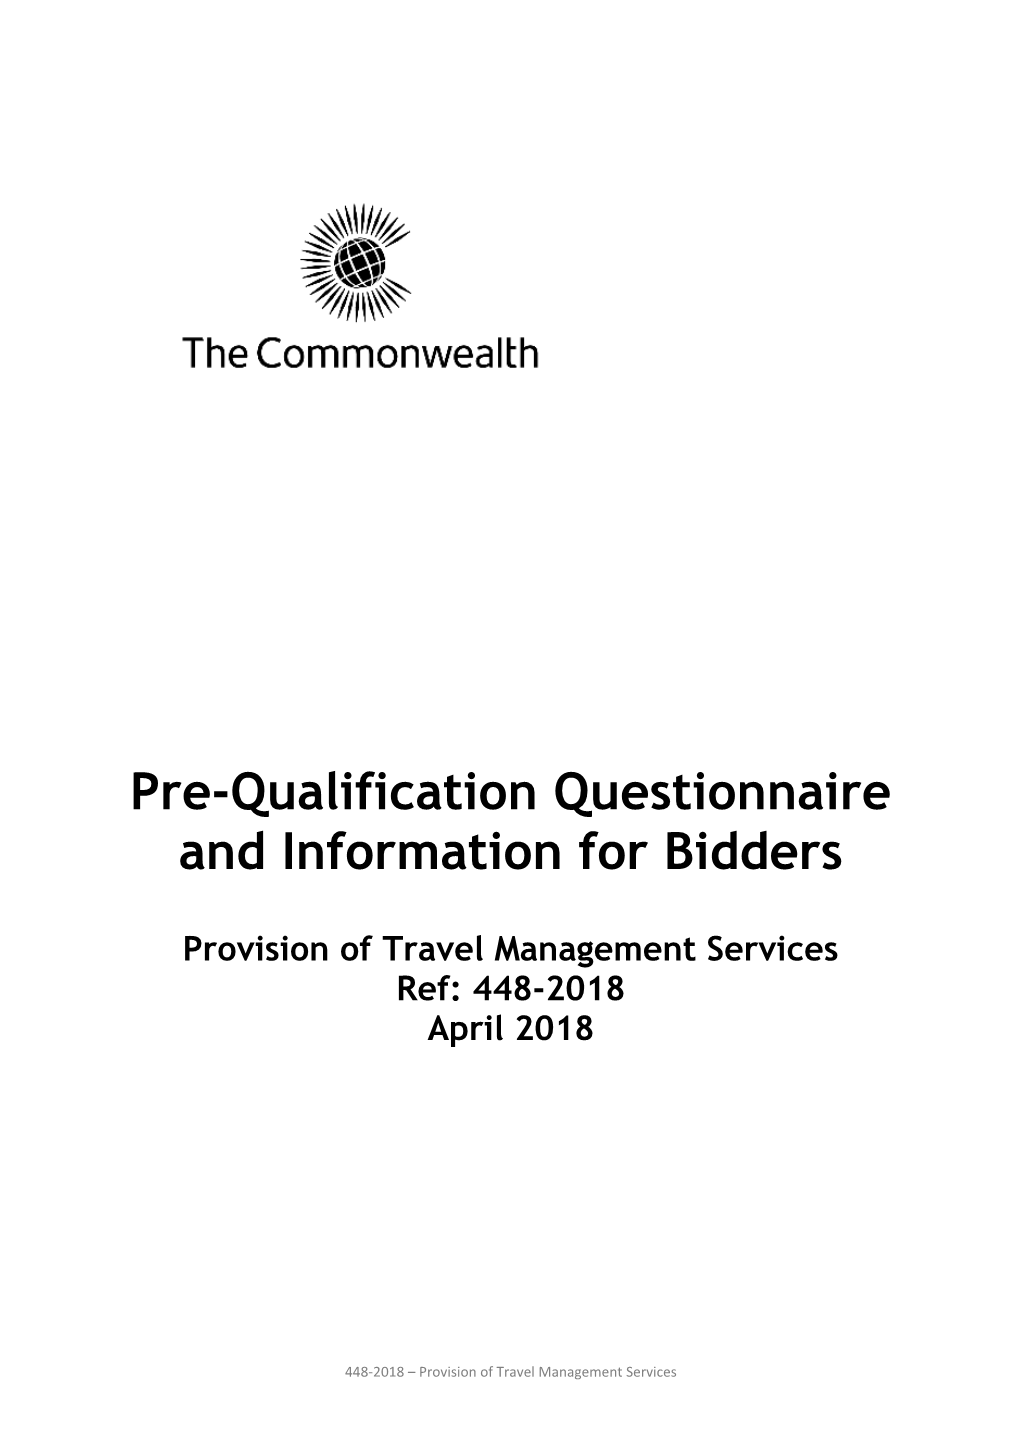 Pre-Qualification Questionnaire and Information for Bidders